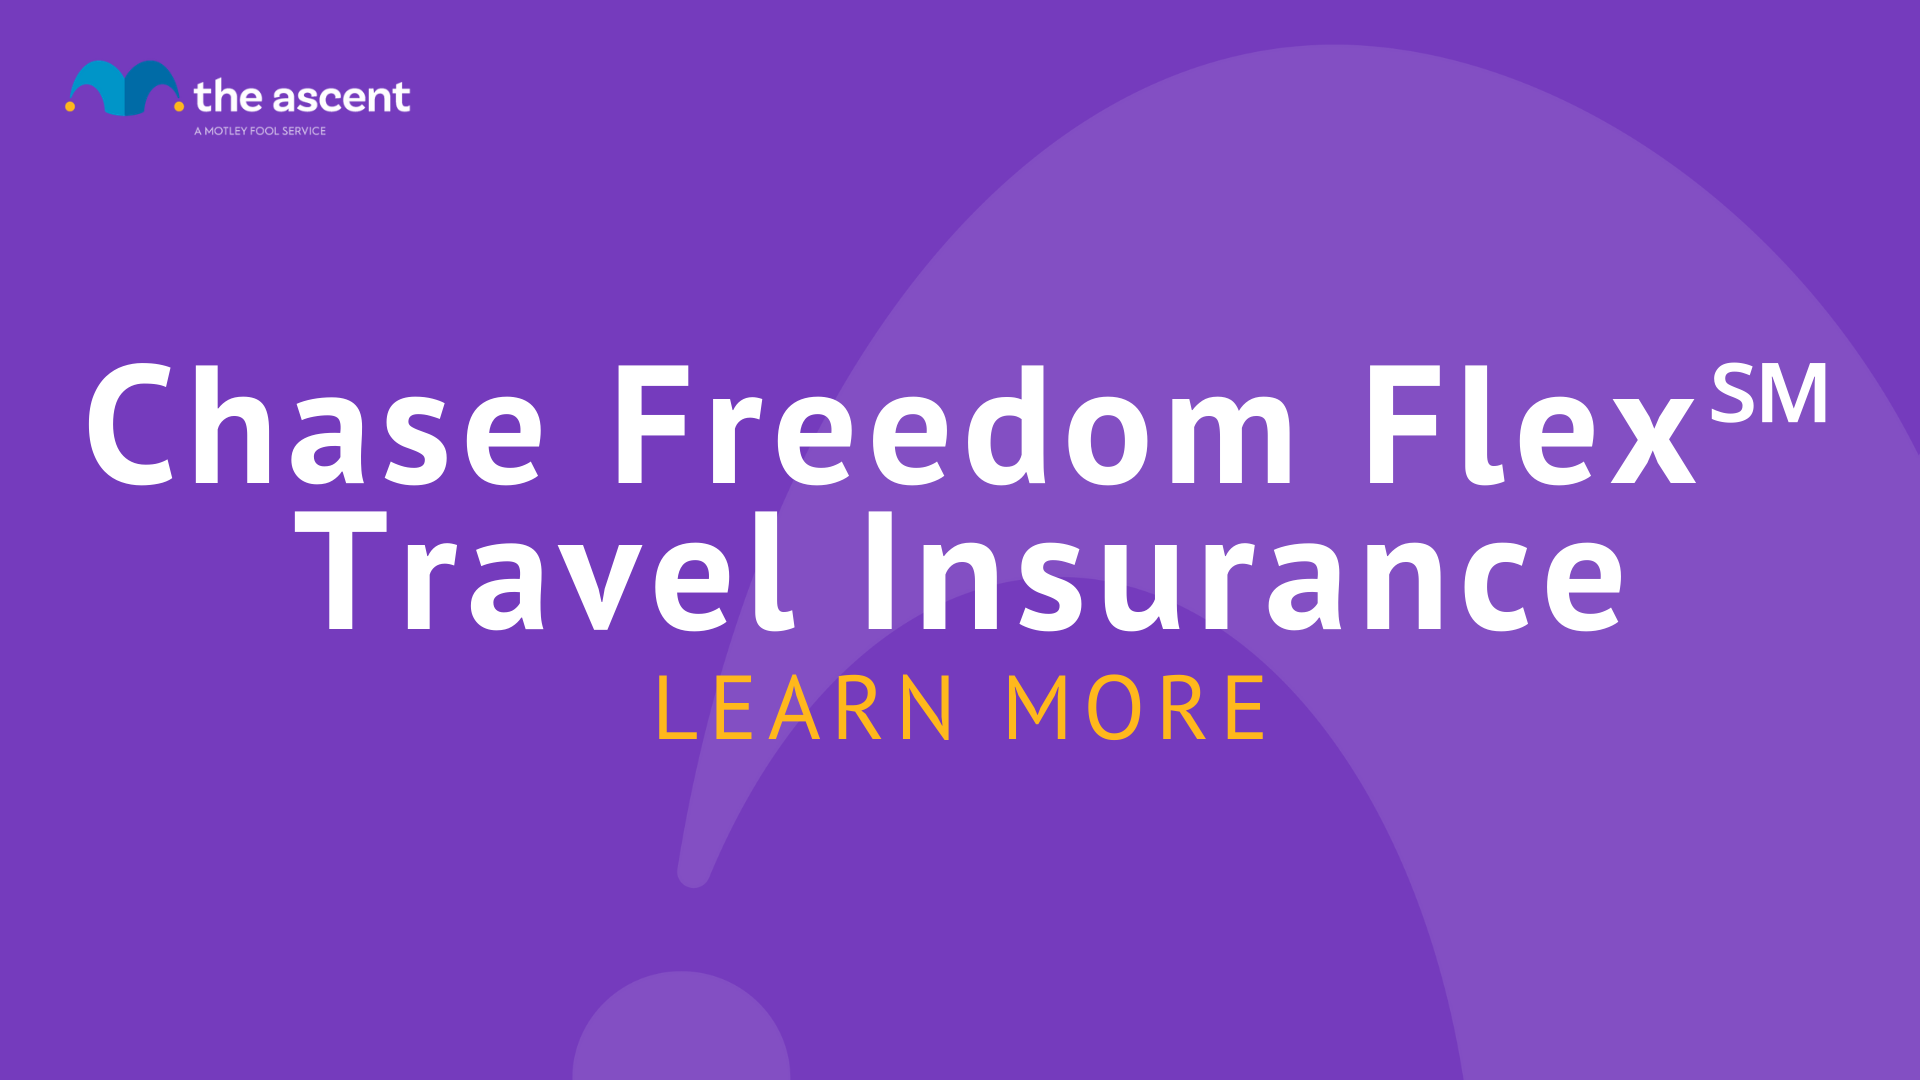 chase eclaims travel insurance